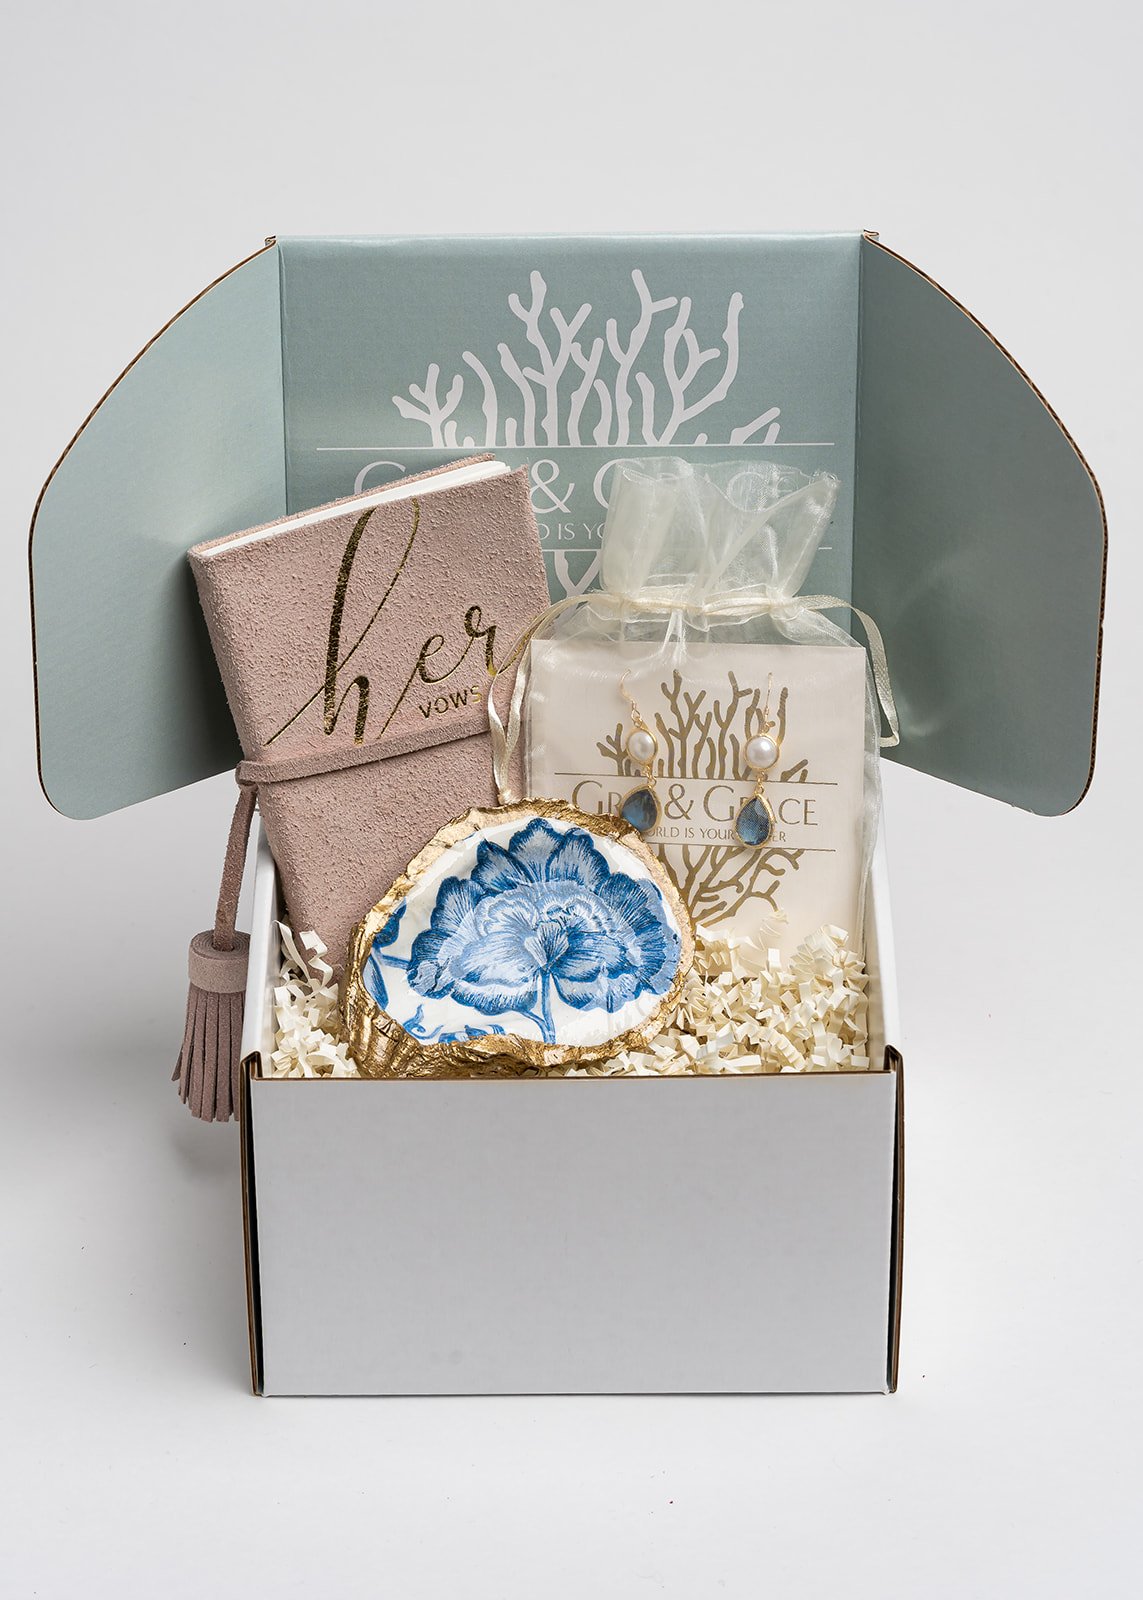 Bride-to-be-bridal-gift-basket — Grit and Grace Studio